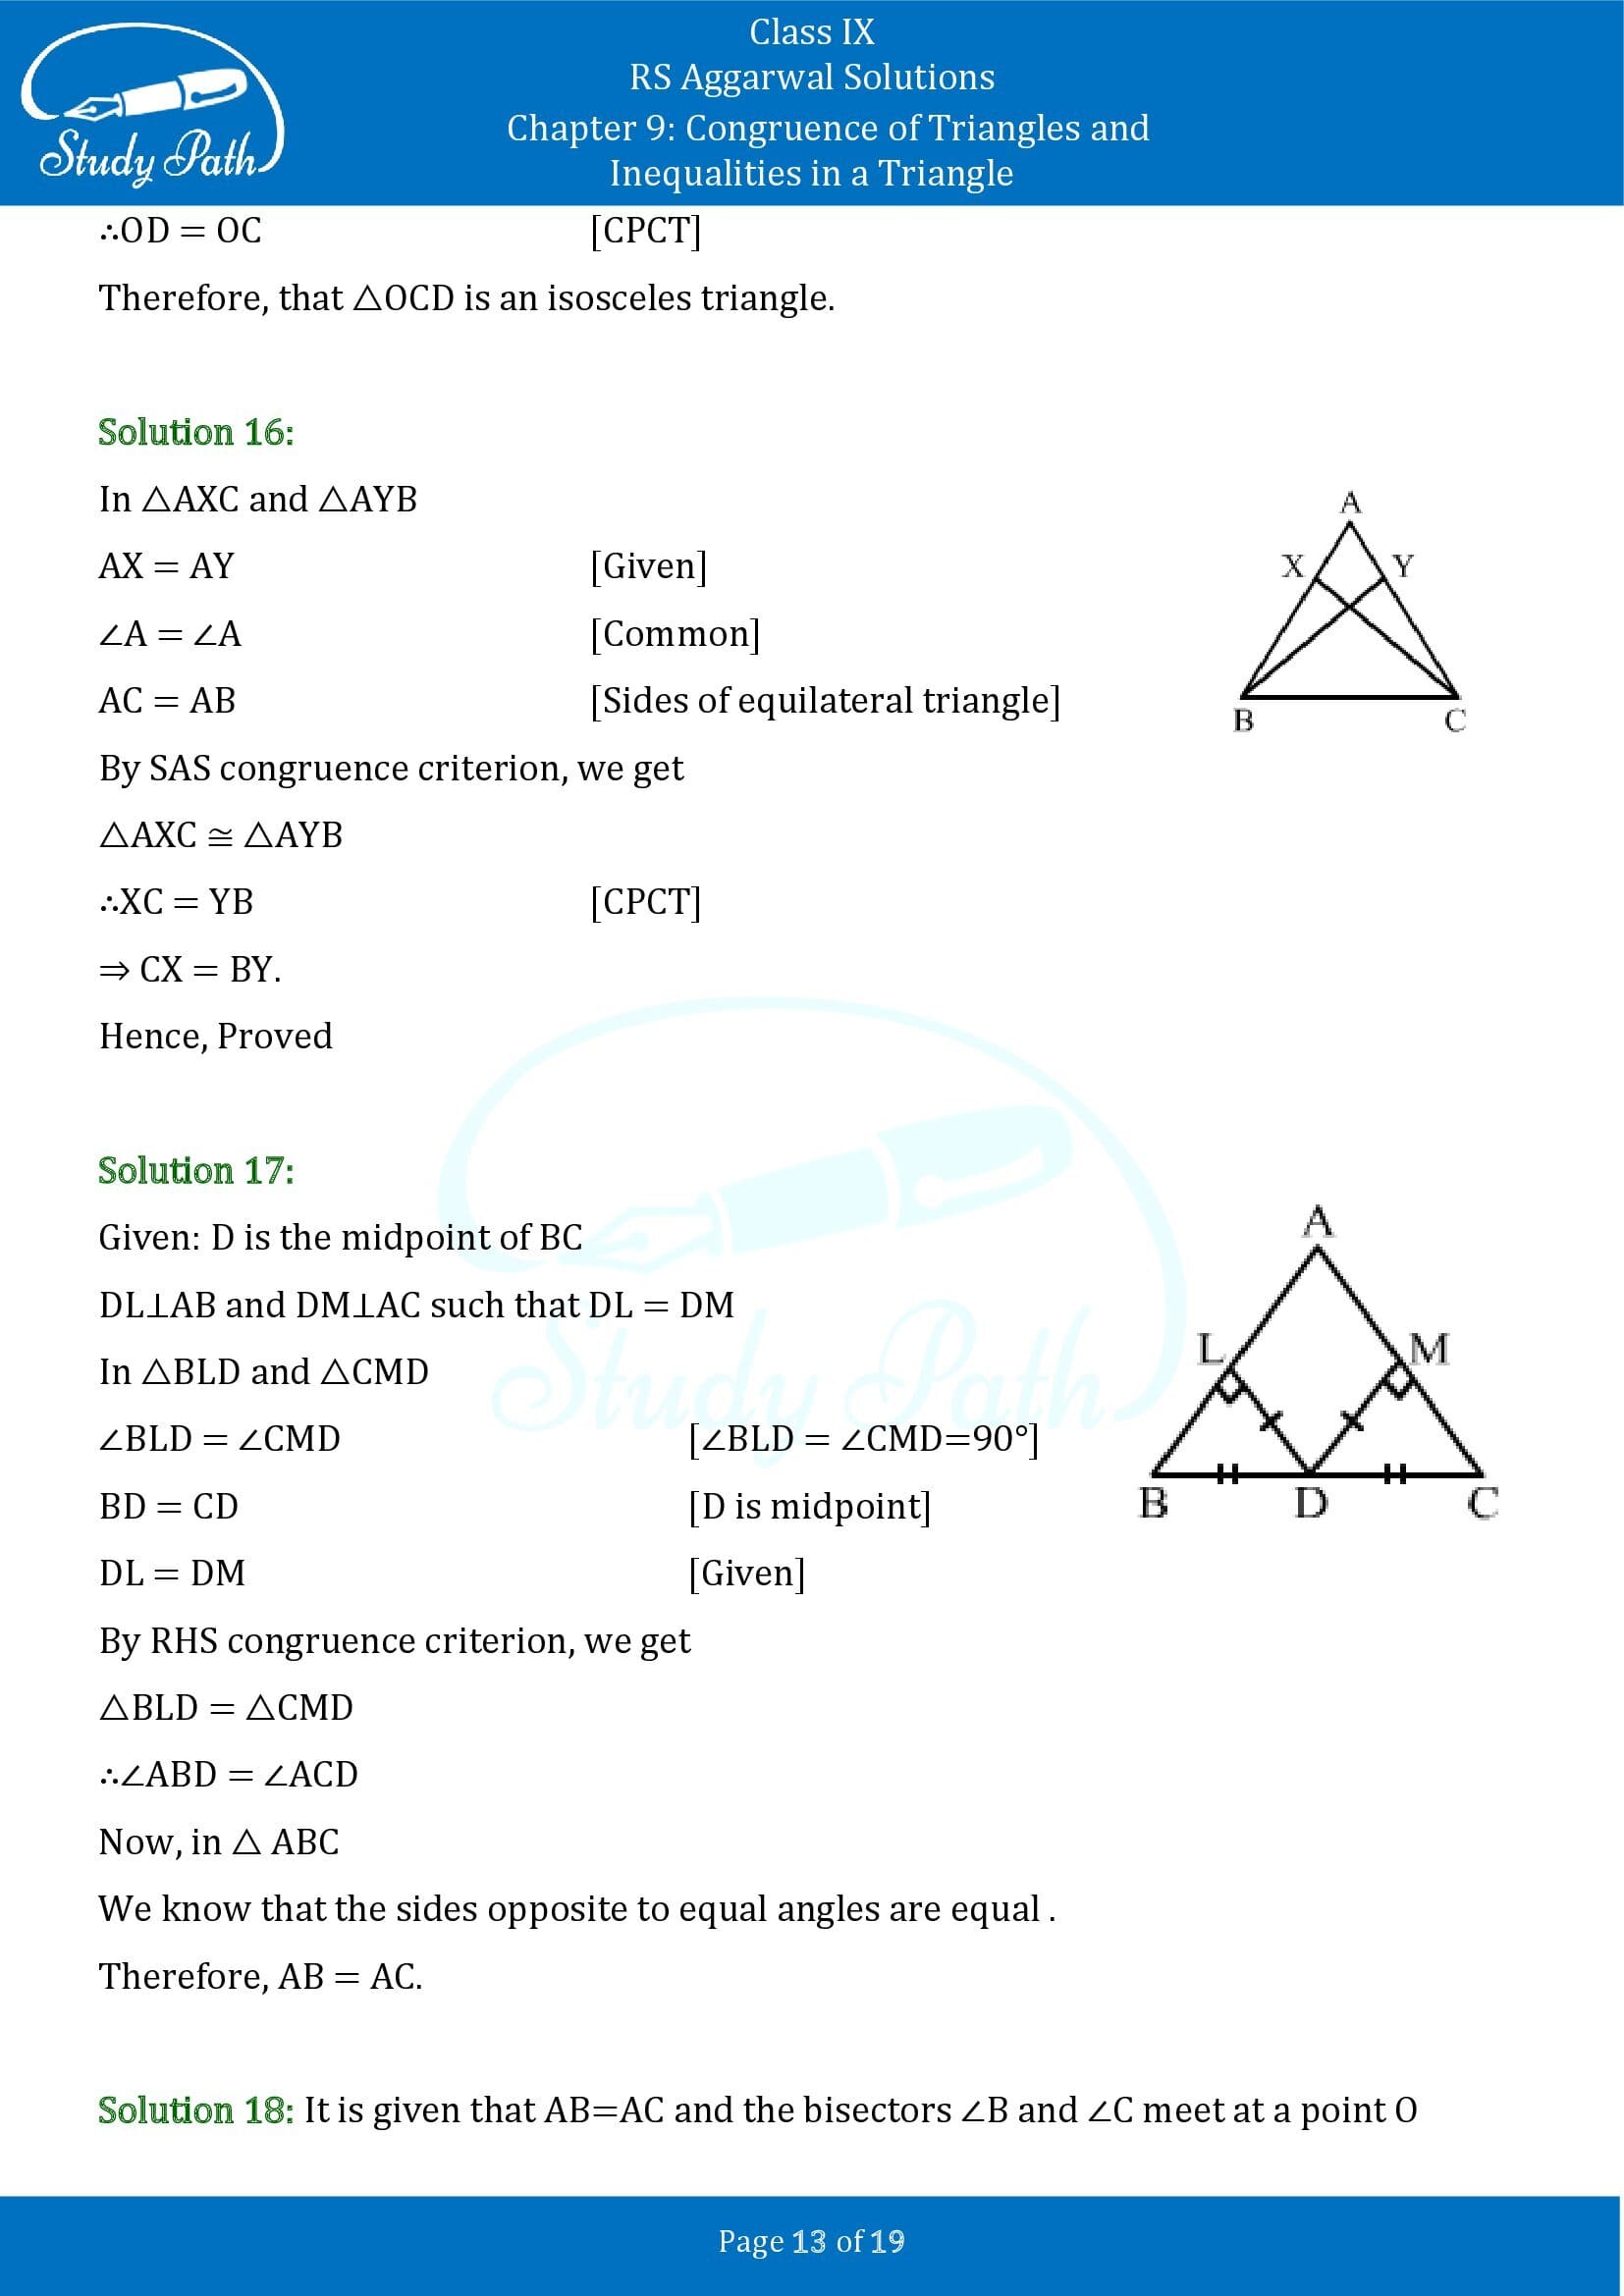 RS Aggarwal Solutions Class 9 Chapter 9 Congruence of Triangles and Inequalities in a Triangle Exercise 9A 0013